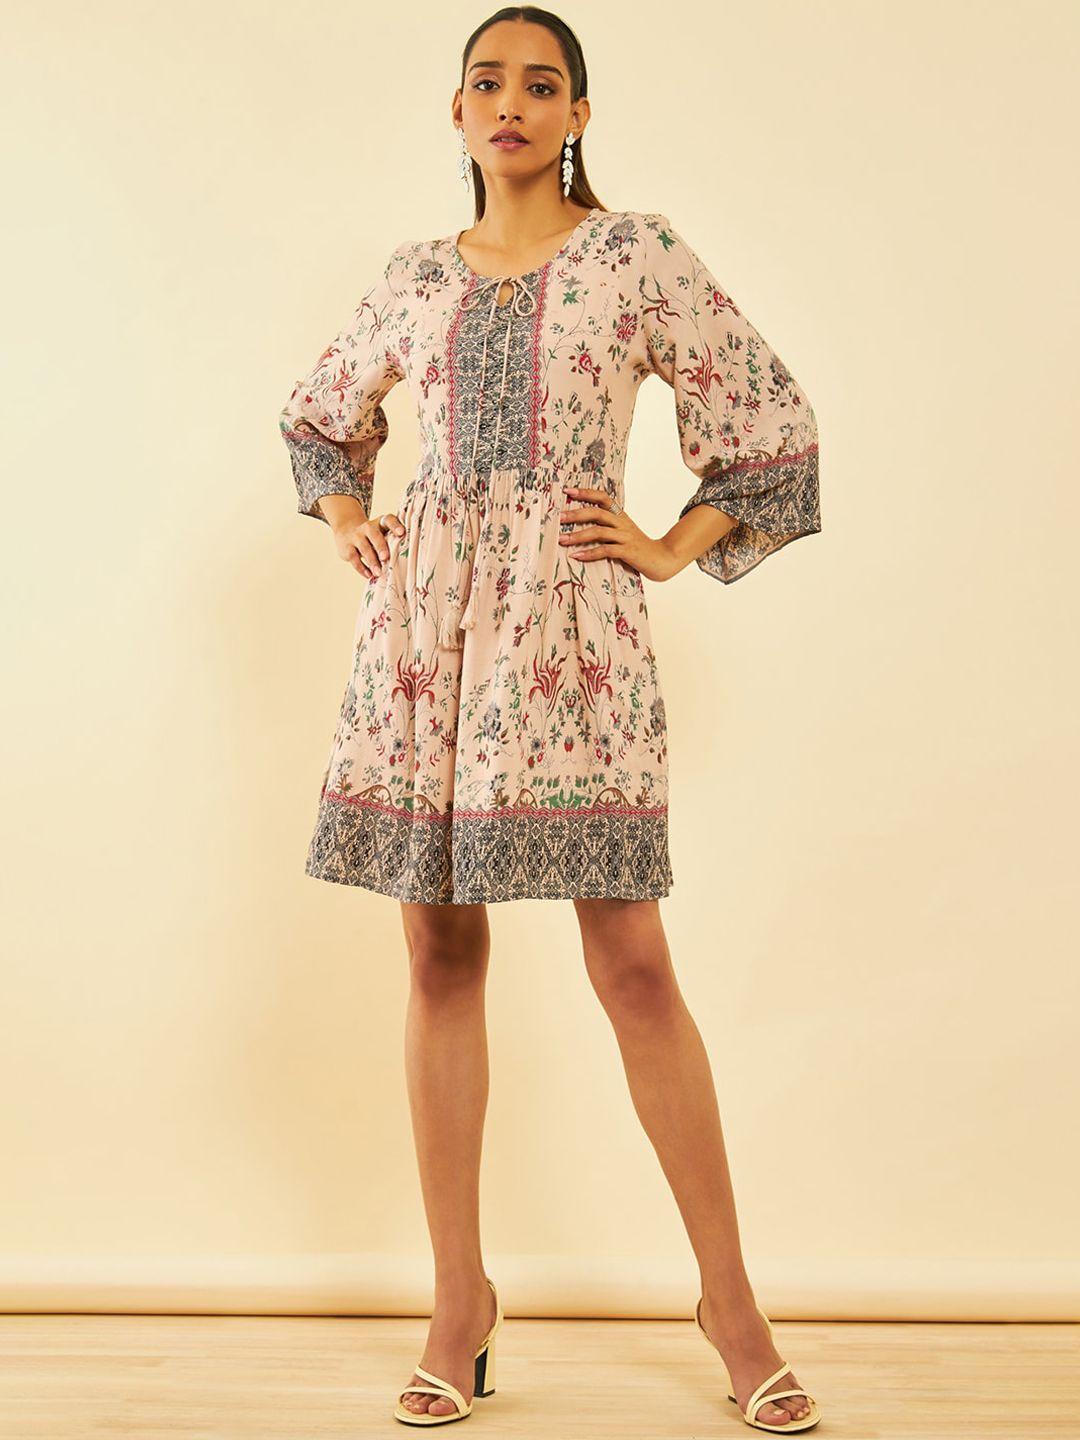 soch floral printed flared ethnic dresses